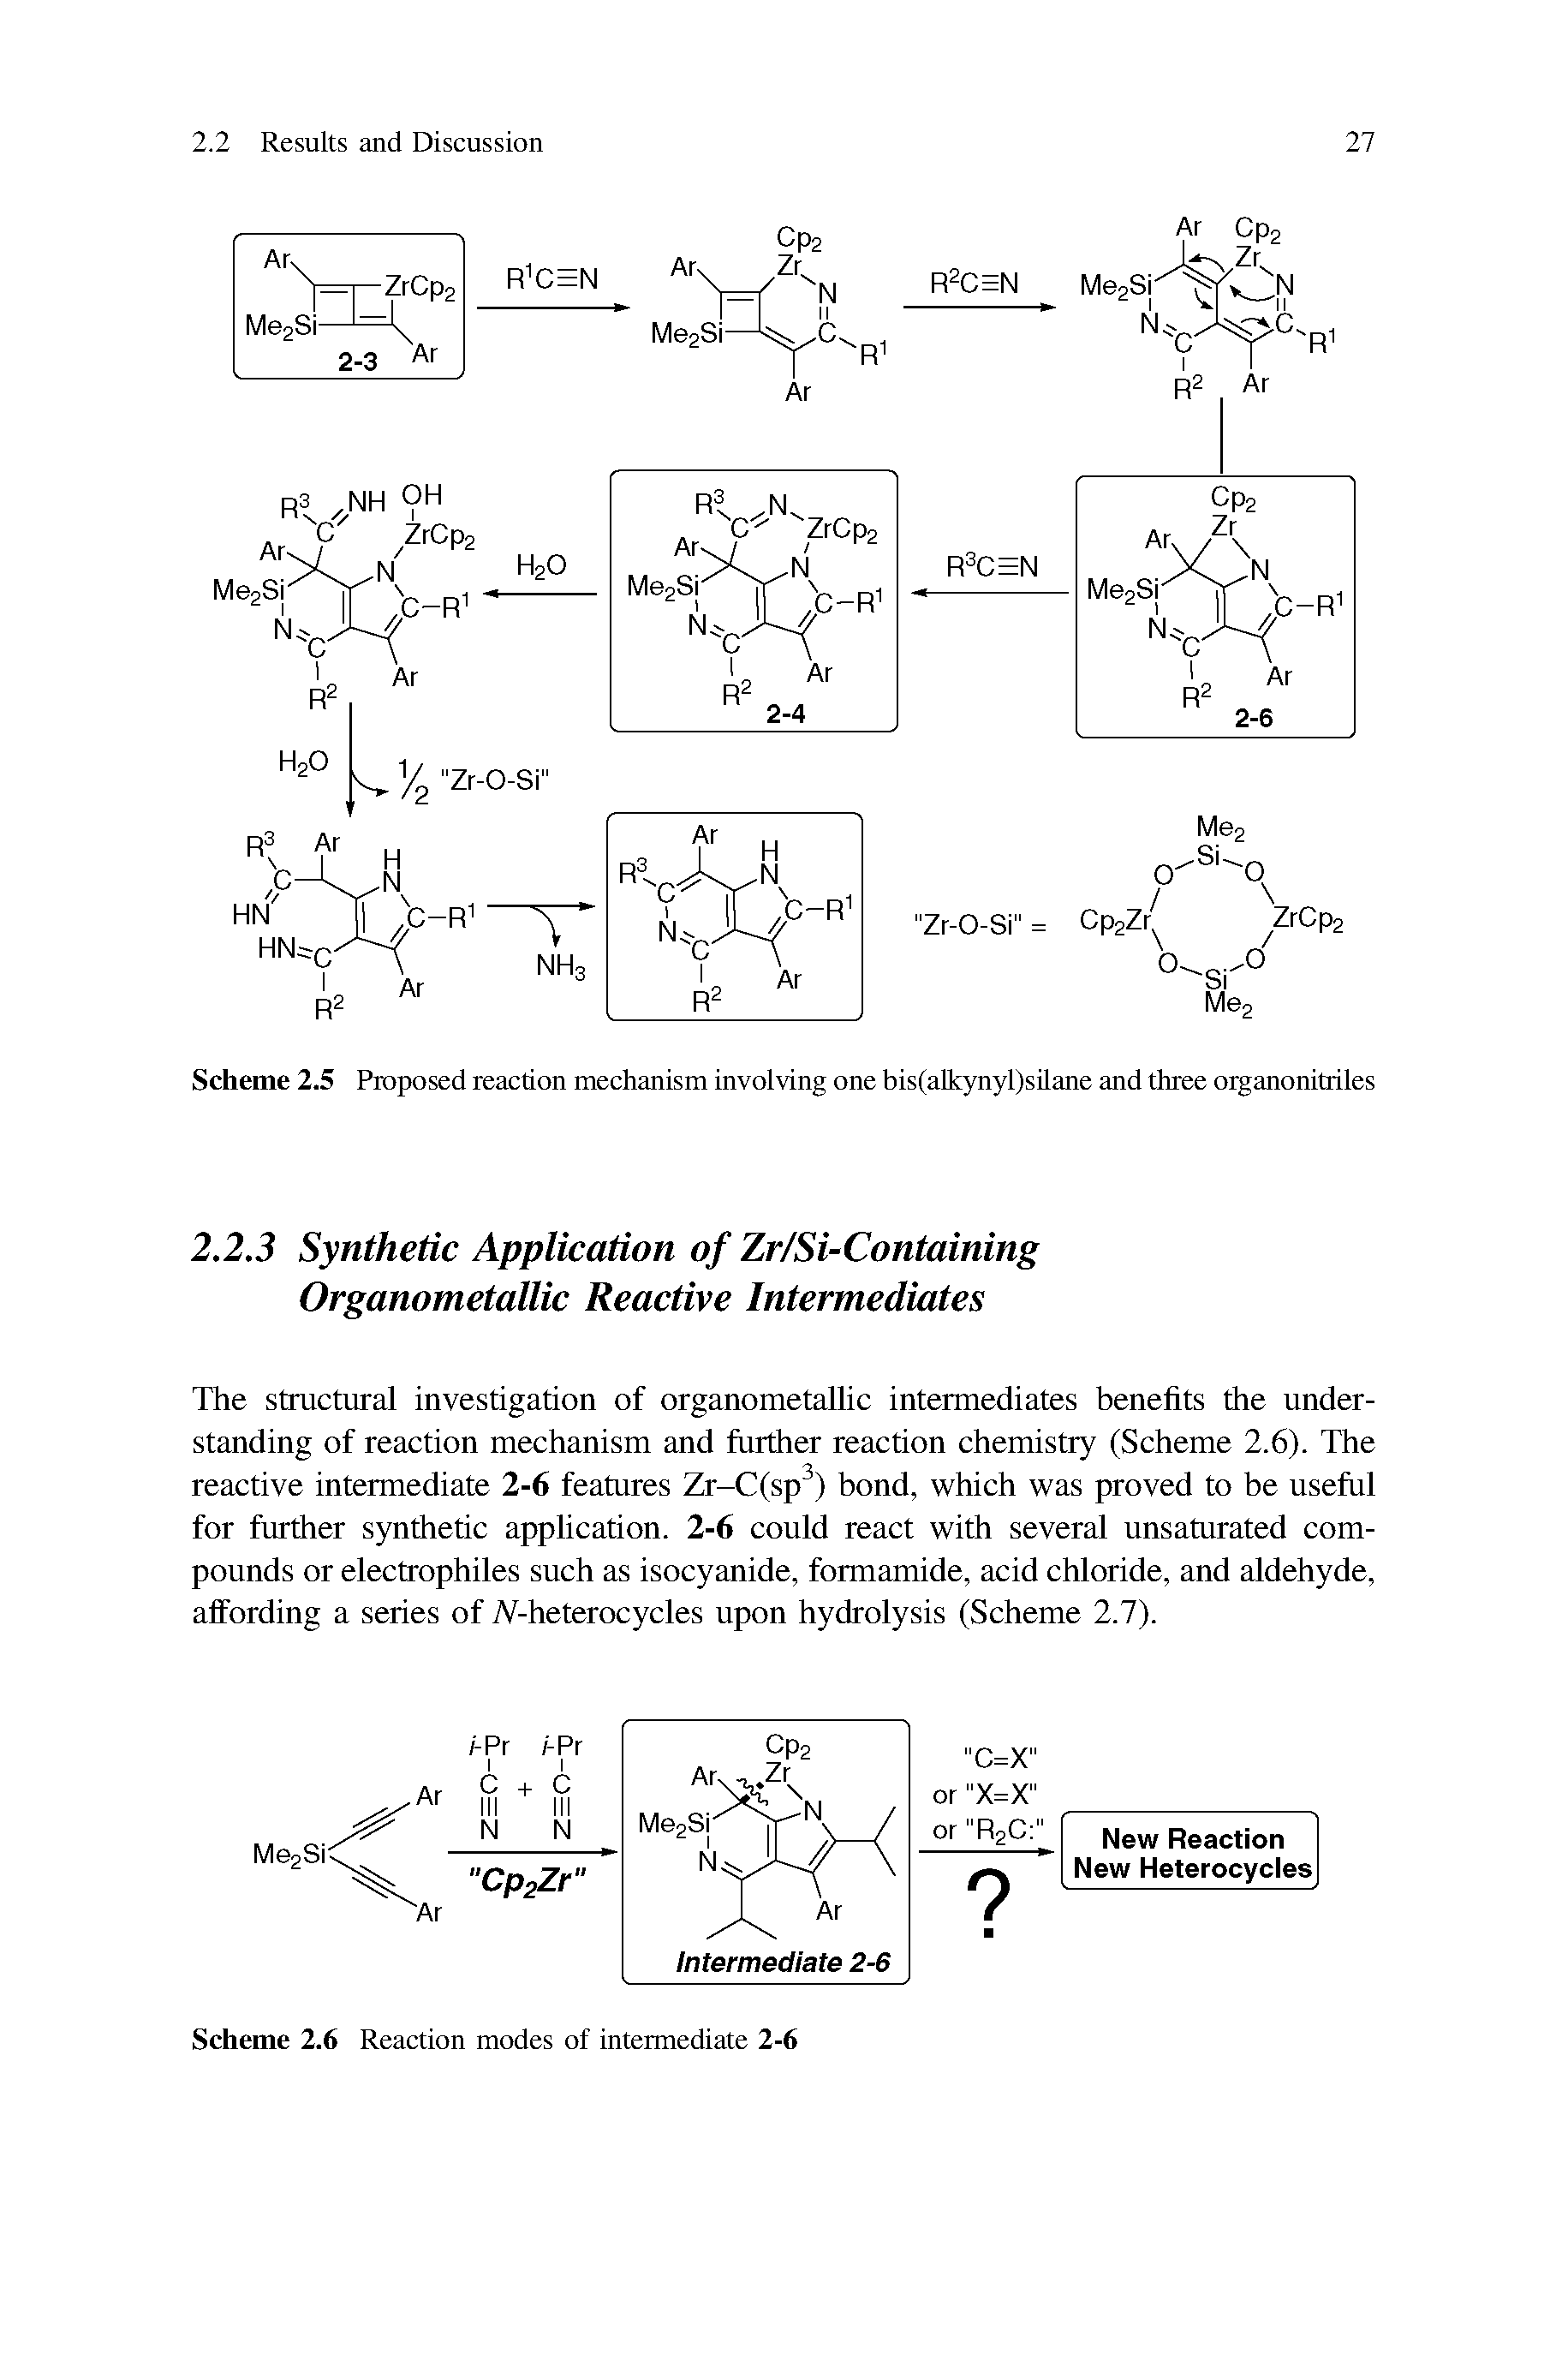 Scheme 2.5 Proposed reaction mechanism involving one bis(alkynyl)silane and three organonitriles...